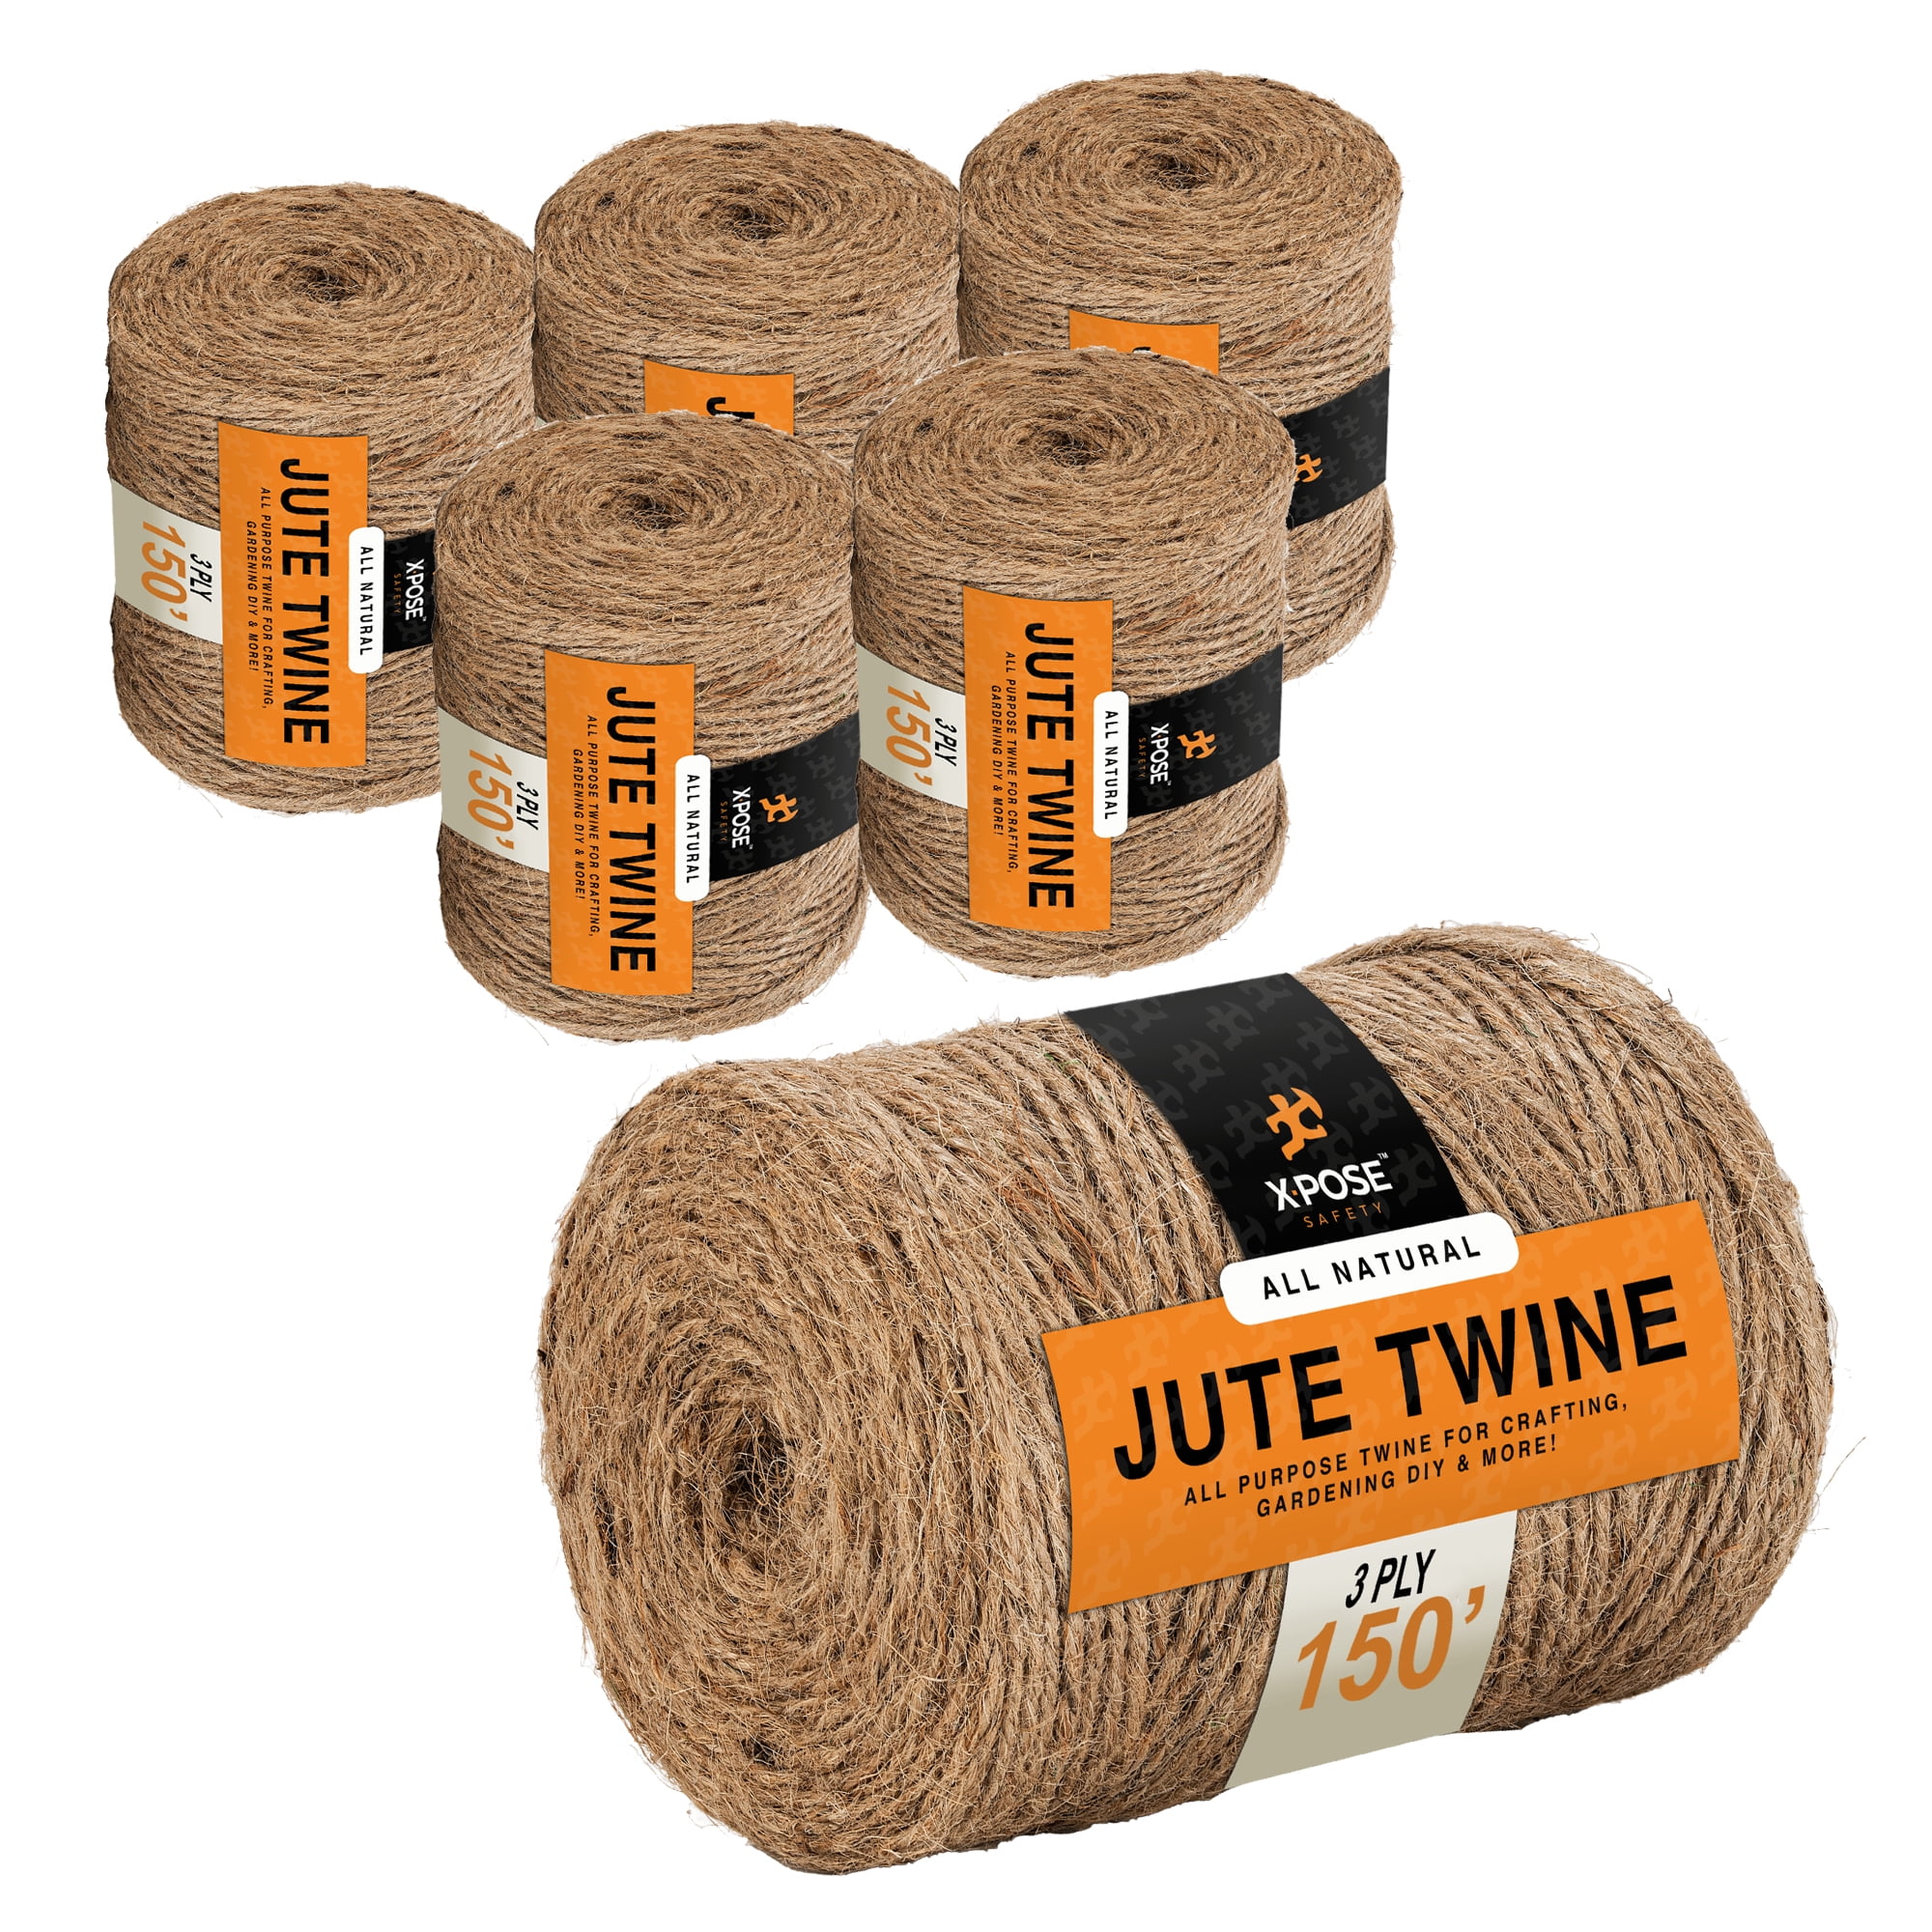 jijAcraft Natural Jute Twine 164 Feet - 5mm Thick Twine String - Garden  Twine for Climbing Plants - Strong Hemp Twine String Durable Rope for  Crafts